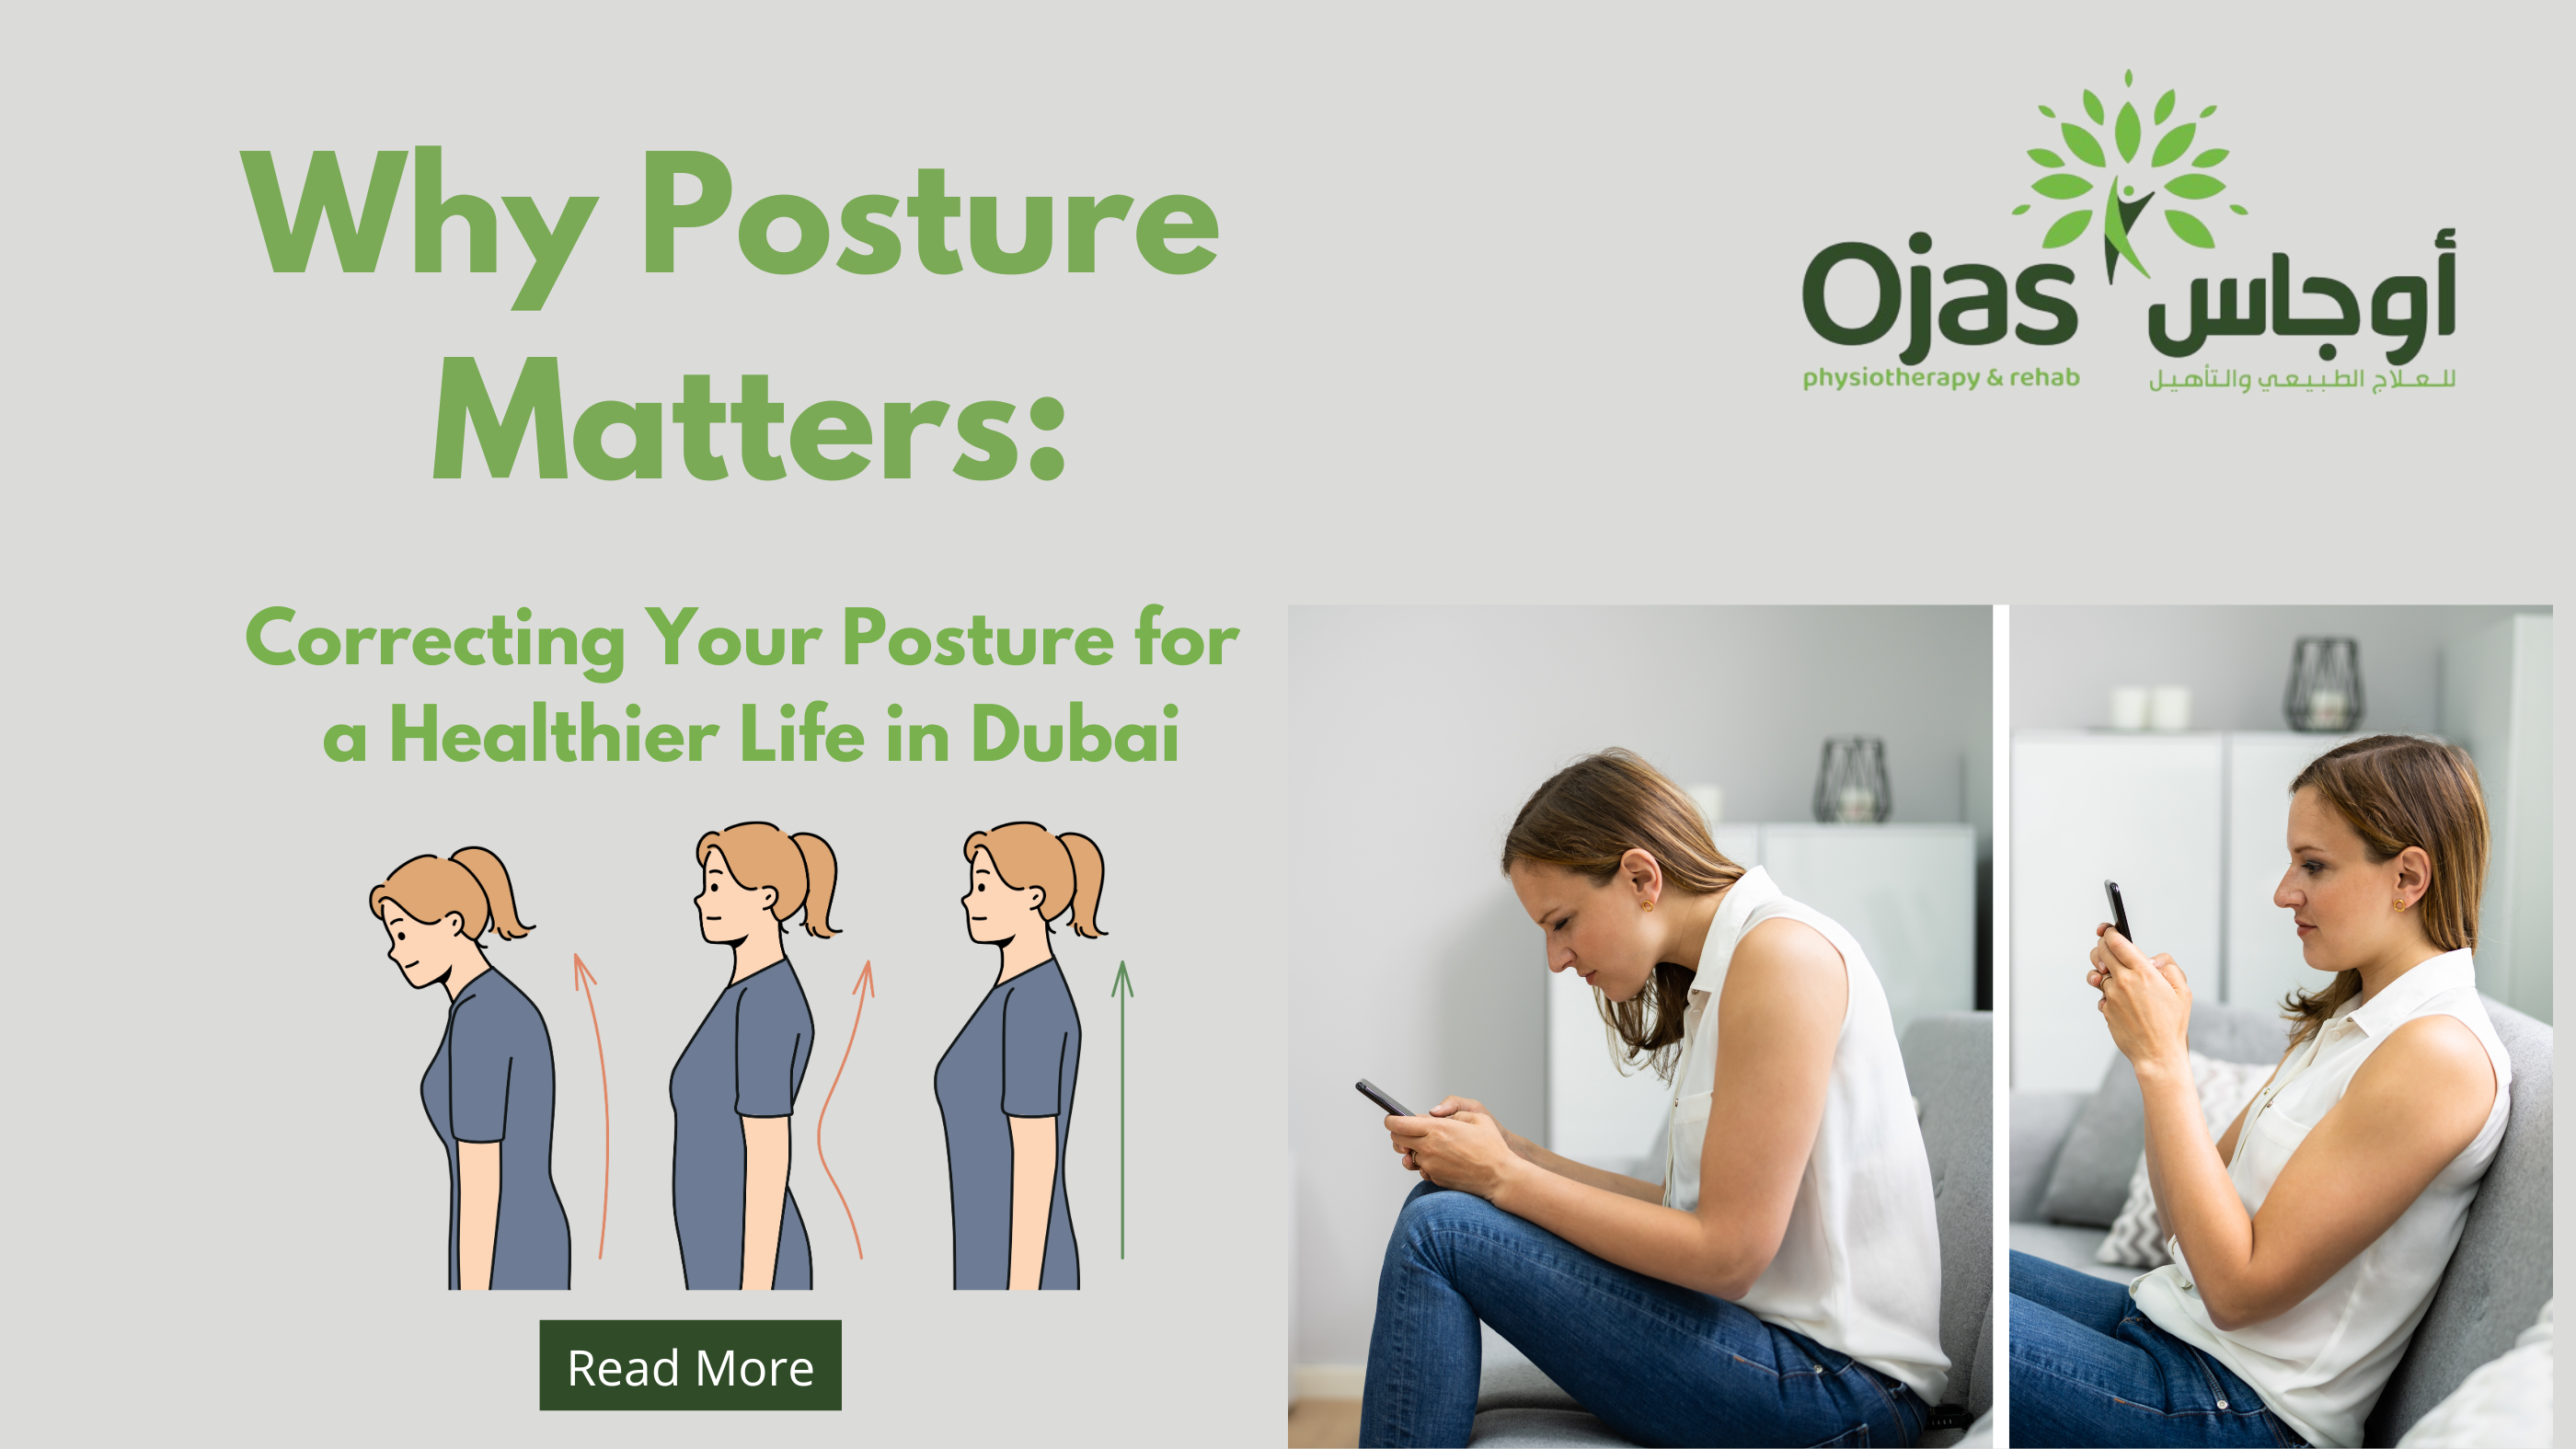 Why Posture Matters: Correcting Your Posture for a Healthier Life in Dubai